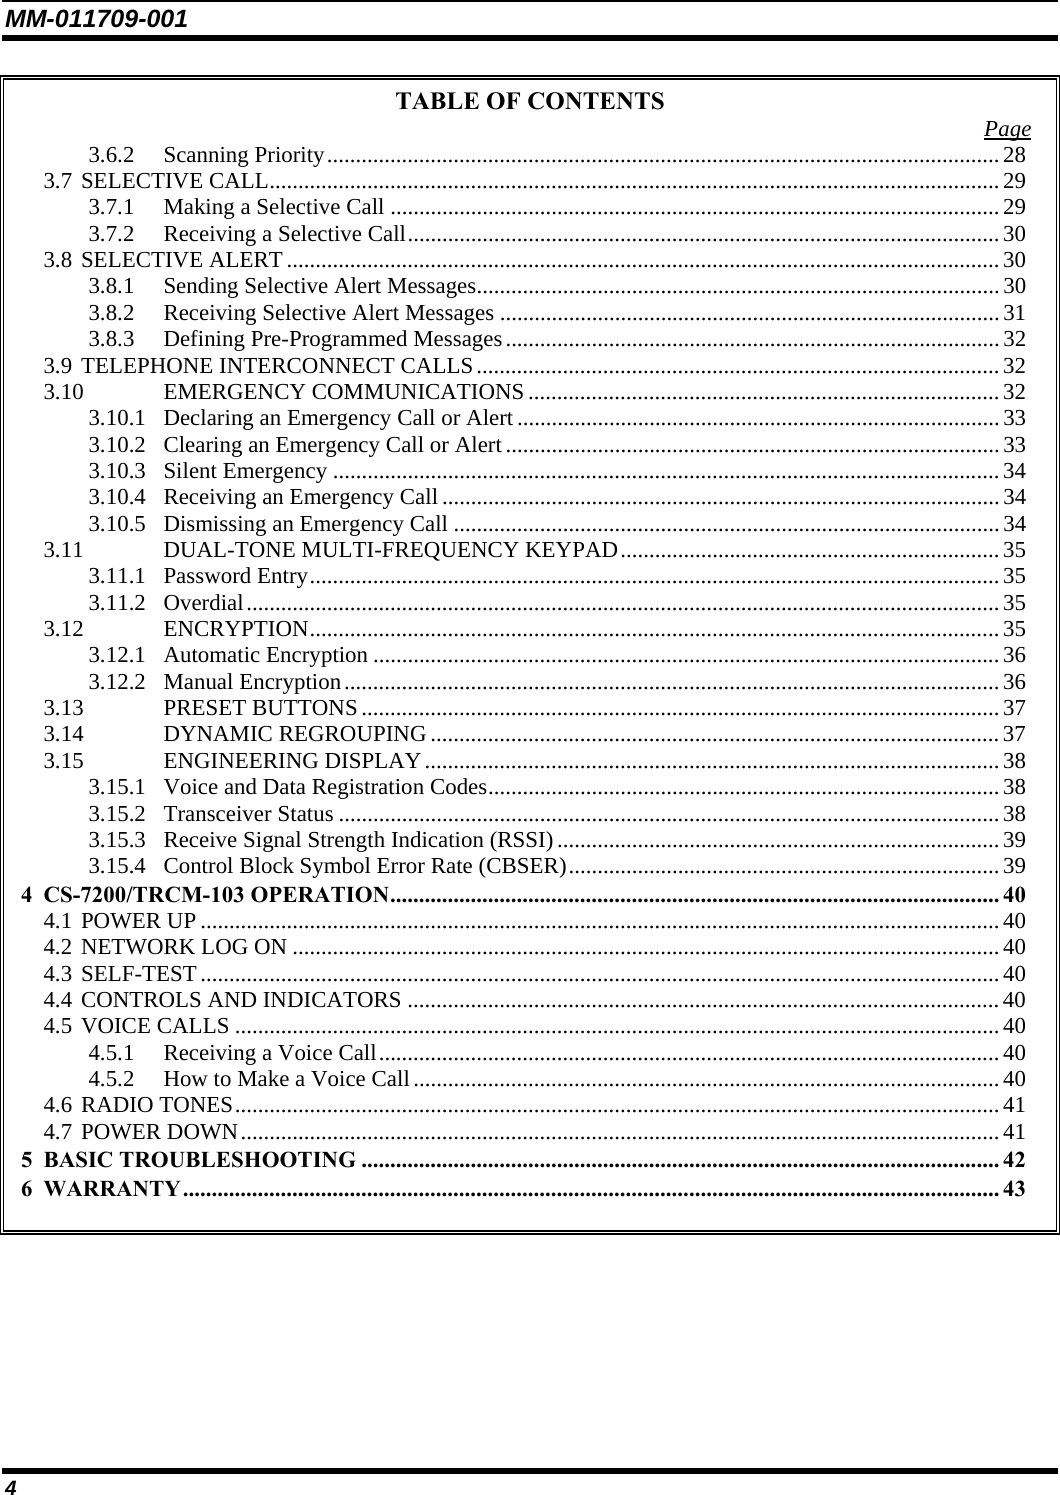 MM-011709-001 4 TABLE OF CONTENTS  Page 3.6.2 Scanning Priority.....................................................................................................................28 3.7 SELECTIVE CALL............................................................................................................................... 29 3.7.1 Making a Selective Call ..........................................................................................................29 3.7.2 Receiving a Selective Call.......................................................................................................30 3.8 SELECTIVE ALERT ............................................................................................................................30 3.8.1 Sending Selective Alert Messages...........................................................................................30 3.8.2 Receiving Selective Alert Messages .......................................................................................31 3.8.3 Defining Pre-Programmed Messages...................................................................................... 32 3.9 TELEPHONE INTERCONNECT CALLS...........................................................................................32 3.10 EMERGENCY COMMUNICATIONS..................................................................................32 3.10.1 Declaring an Emergency Call or Alert....................................................................................33 3.10.2 Clearing an Emergency Call or Alert...................................................................................... 33 3.10.3 Silent Emergency ....................................................................................................................34 3.10.4 Receiving an Emergency Call .................................................................................................34 3.10.5 Dismissing an Emergency Call ...............................................................................................34 3.11 DUAL-TONE MULTI-FREQUENCY KEYPAD.................................................................. 35 3.11.1 Password Entry........................................................................................................................35 3.11.2 Overdial...................................................................................................................................35 3.12 ENCRYPTION........................................................................................................................ 35 3.12.1 Automatic Encryption .............................................................................................................36 3.12.2 Manual Encryption..................................................................................................................36 3.13 PRESET BUTTONS............................................................................................................... 37 3.14 DYNAMIC REGROUPING ...................................................................................................37 3.15 ENGINEERING DISPLAY....................................................................................................38 3.15.1 Voice and Data Registration Codes......................................................................................... 38 3.15.2 Transceiver Status ................................................................................................................... 38 3.15.3 Receive Signal Strength Indication (RSSI)............................................................................. 39 3.15.4 Control Block Symbol Error Rate (CBSER)...........................................................................39 4 CS-7200/TRCM-103 OPERATION.......................................................................................................... 40 4.1 POWER UP ........................................................................................................................................... 40 4.2 NETWORK LOG ON ...........................................................................................................................40 4.3 SELF-TEST...........................................................................................................................................40 4.4 CONTROLS AND INDICATORS .......................................................................................................40 4.5 VOICE CALLS .....................................................................................................................................40 4.5.1 Receiving a Voice Call............................................................................................................40 4.5.2 How to Make a Voice Call...................................................................................................... 40 4.6 RADIO TONES.....................................................................................................................................41 4.7 POWER DOWN.................................................................................................................................... 41 5 BASIC TROUBLESHOOTING ............................................................................................................... 42 6 WARRANTY.............................................................................................................................................. 43  